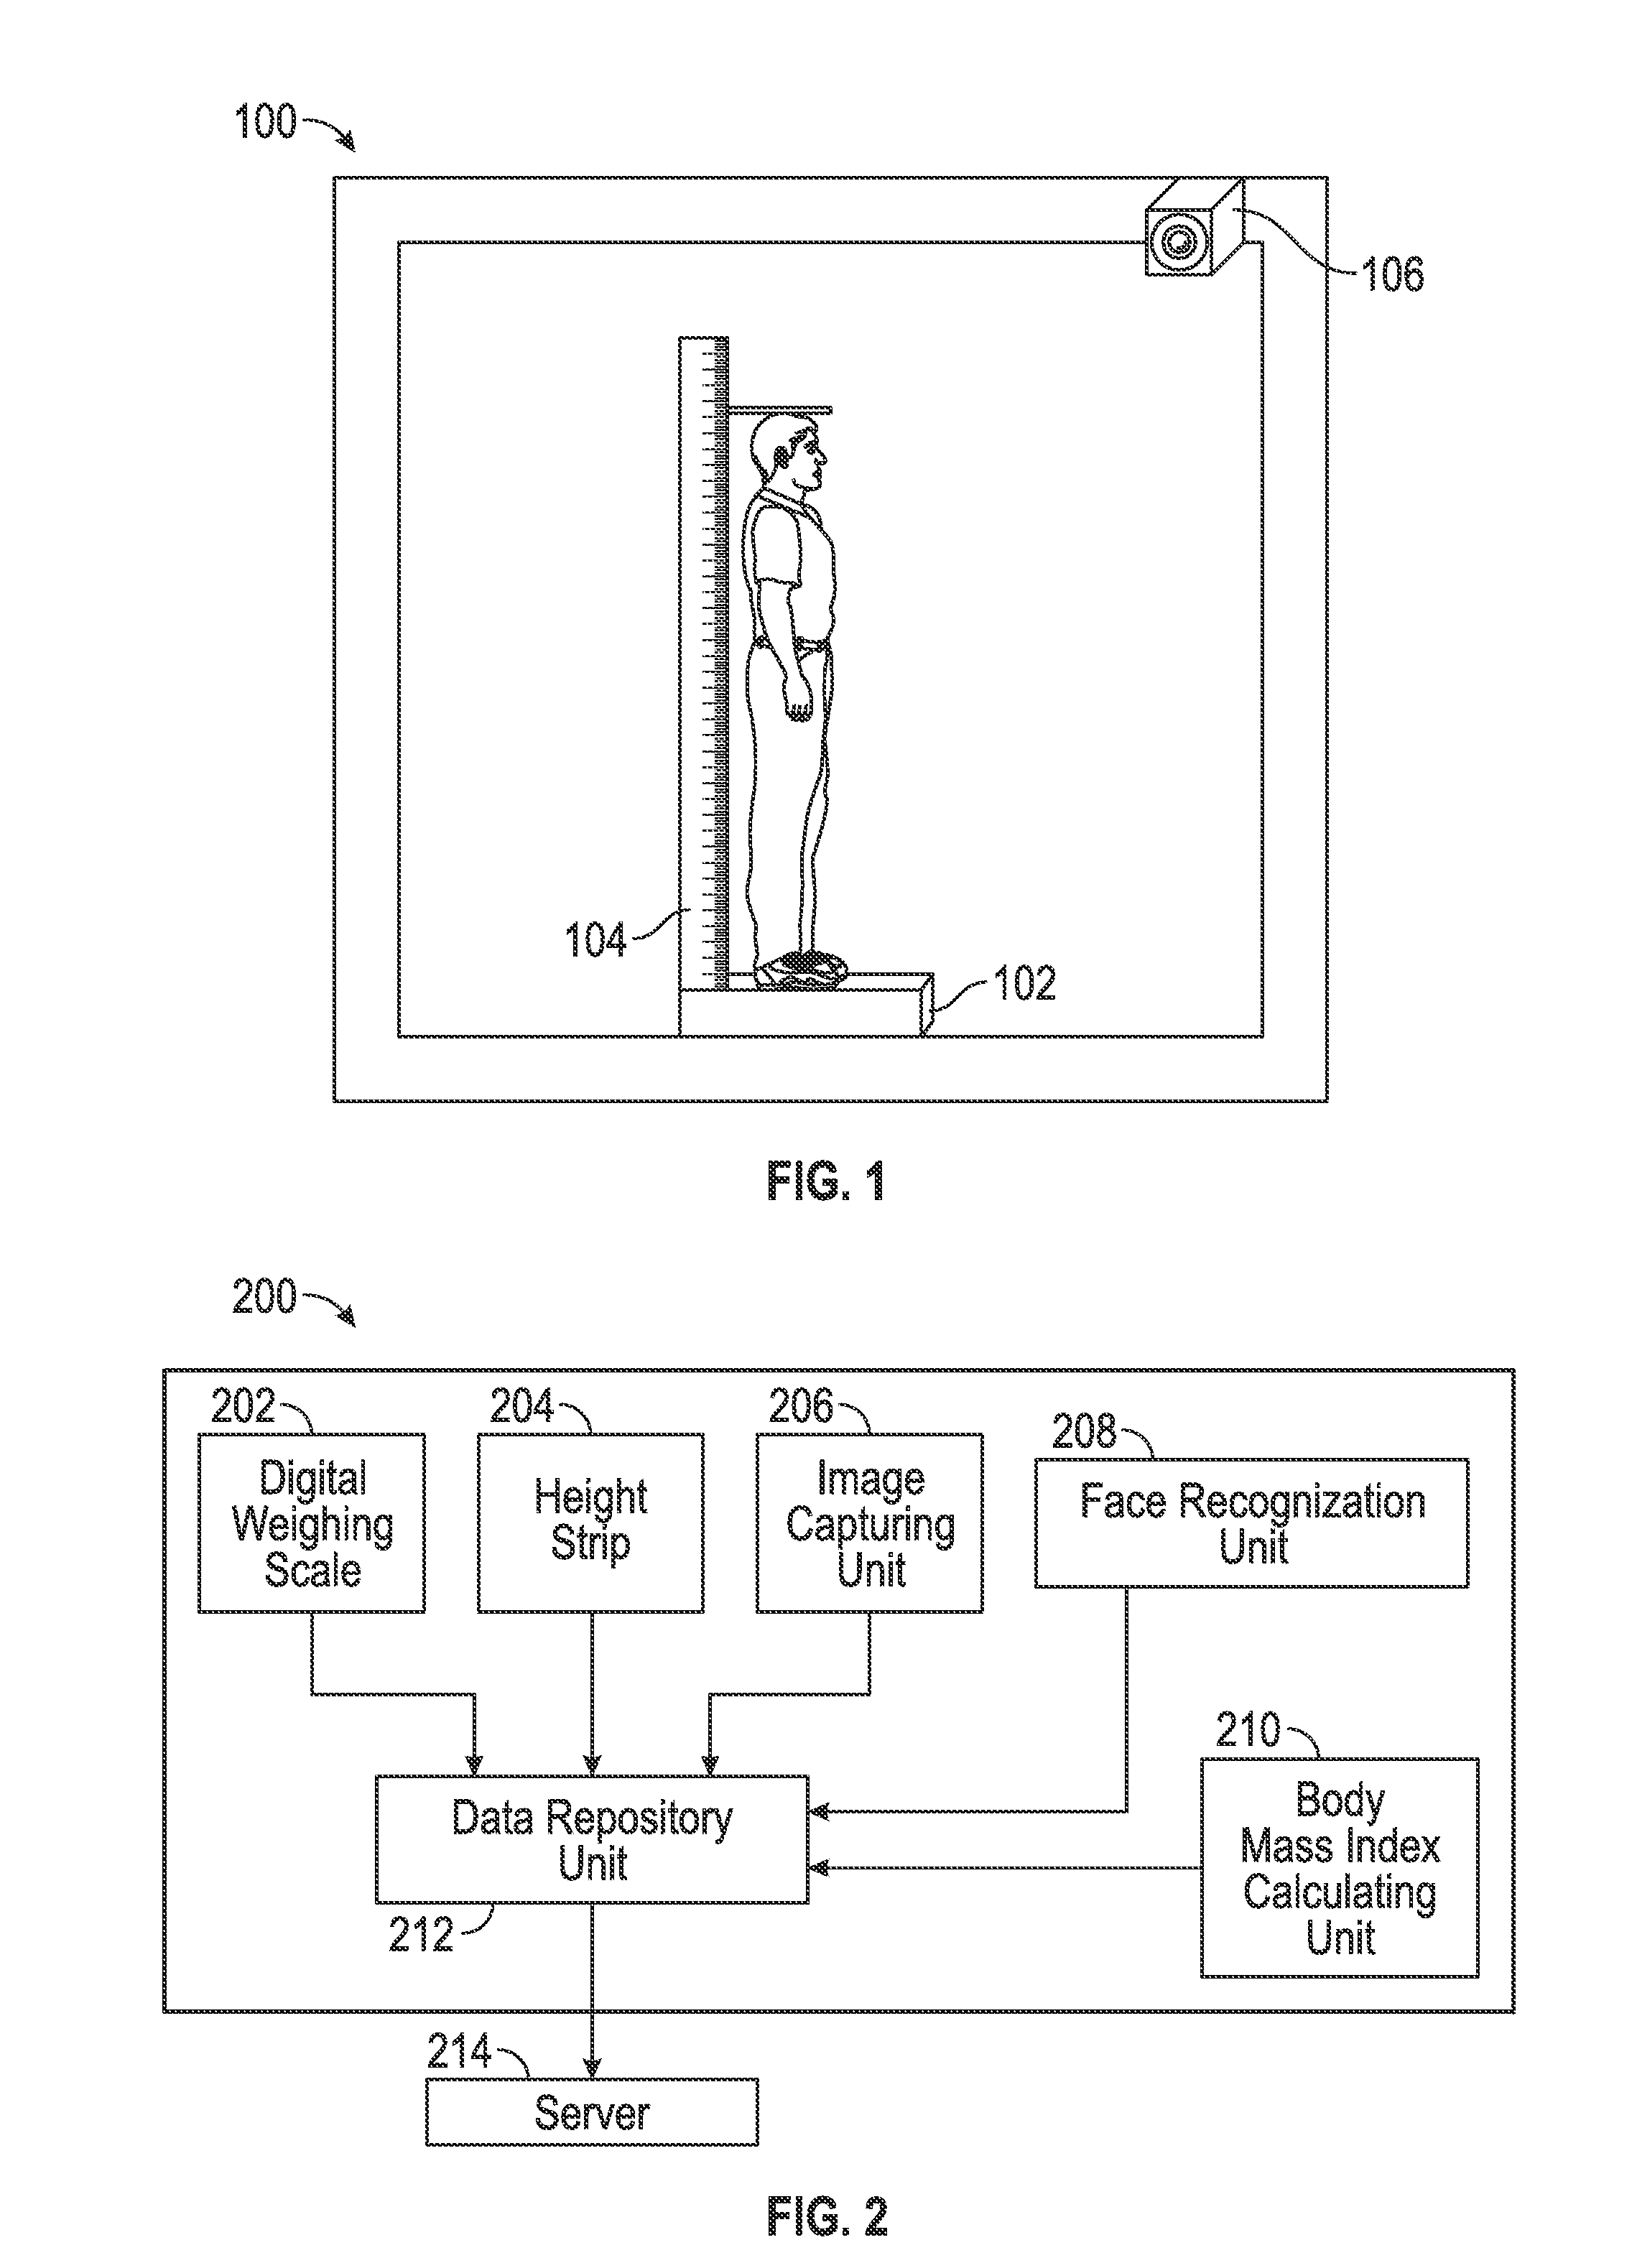 System and method for measuring segment parameters of a human body for recording a body mass index